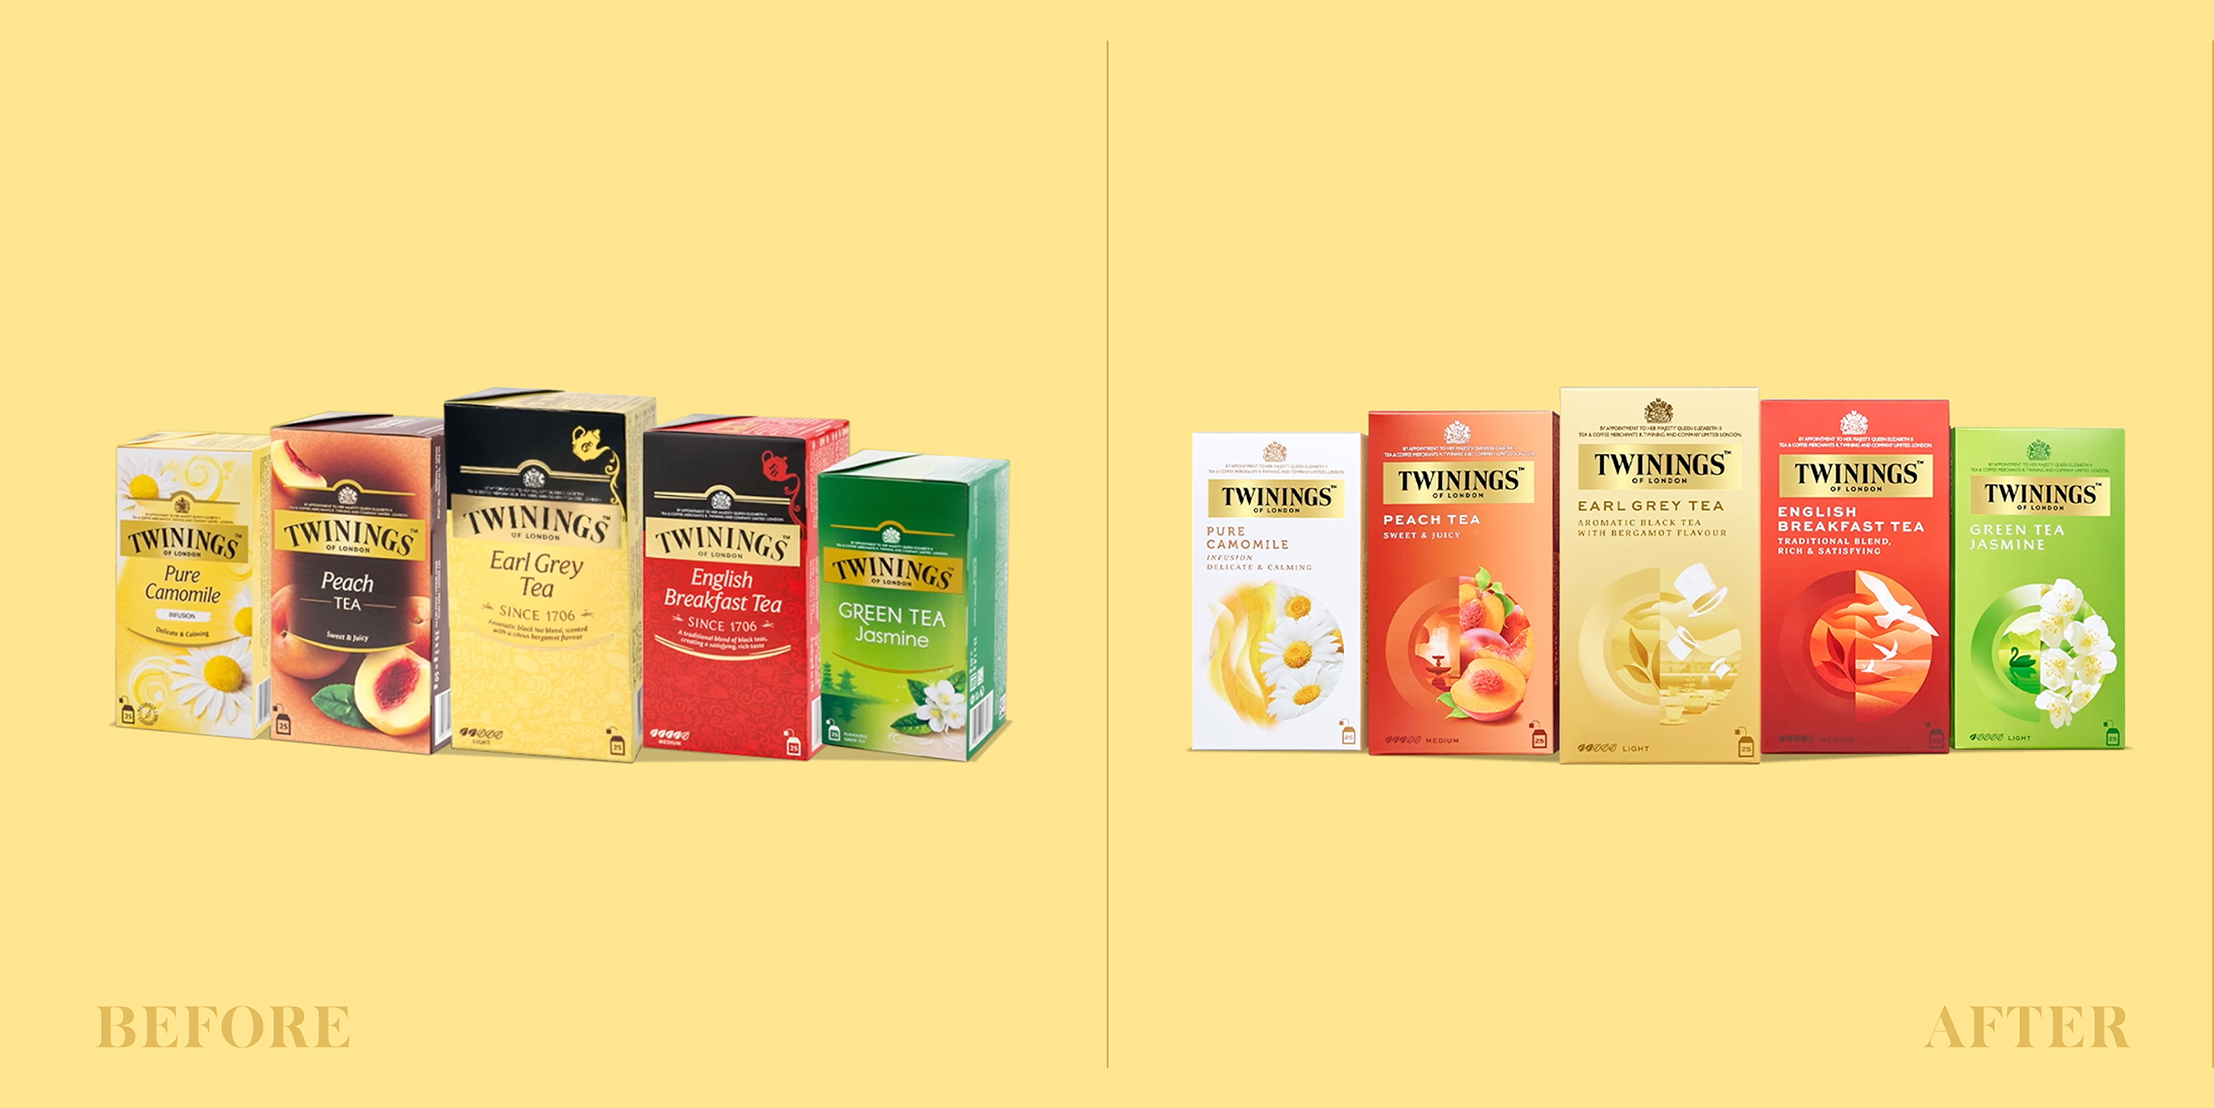 6_Twinings_before_after_16X9-copy.jpg